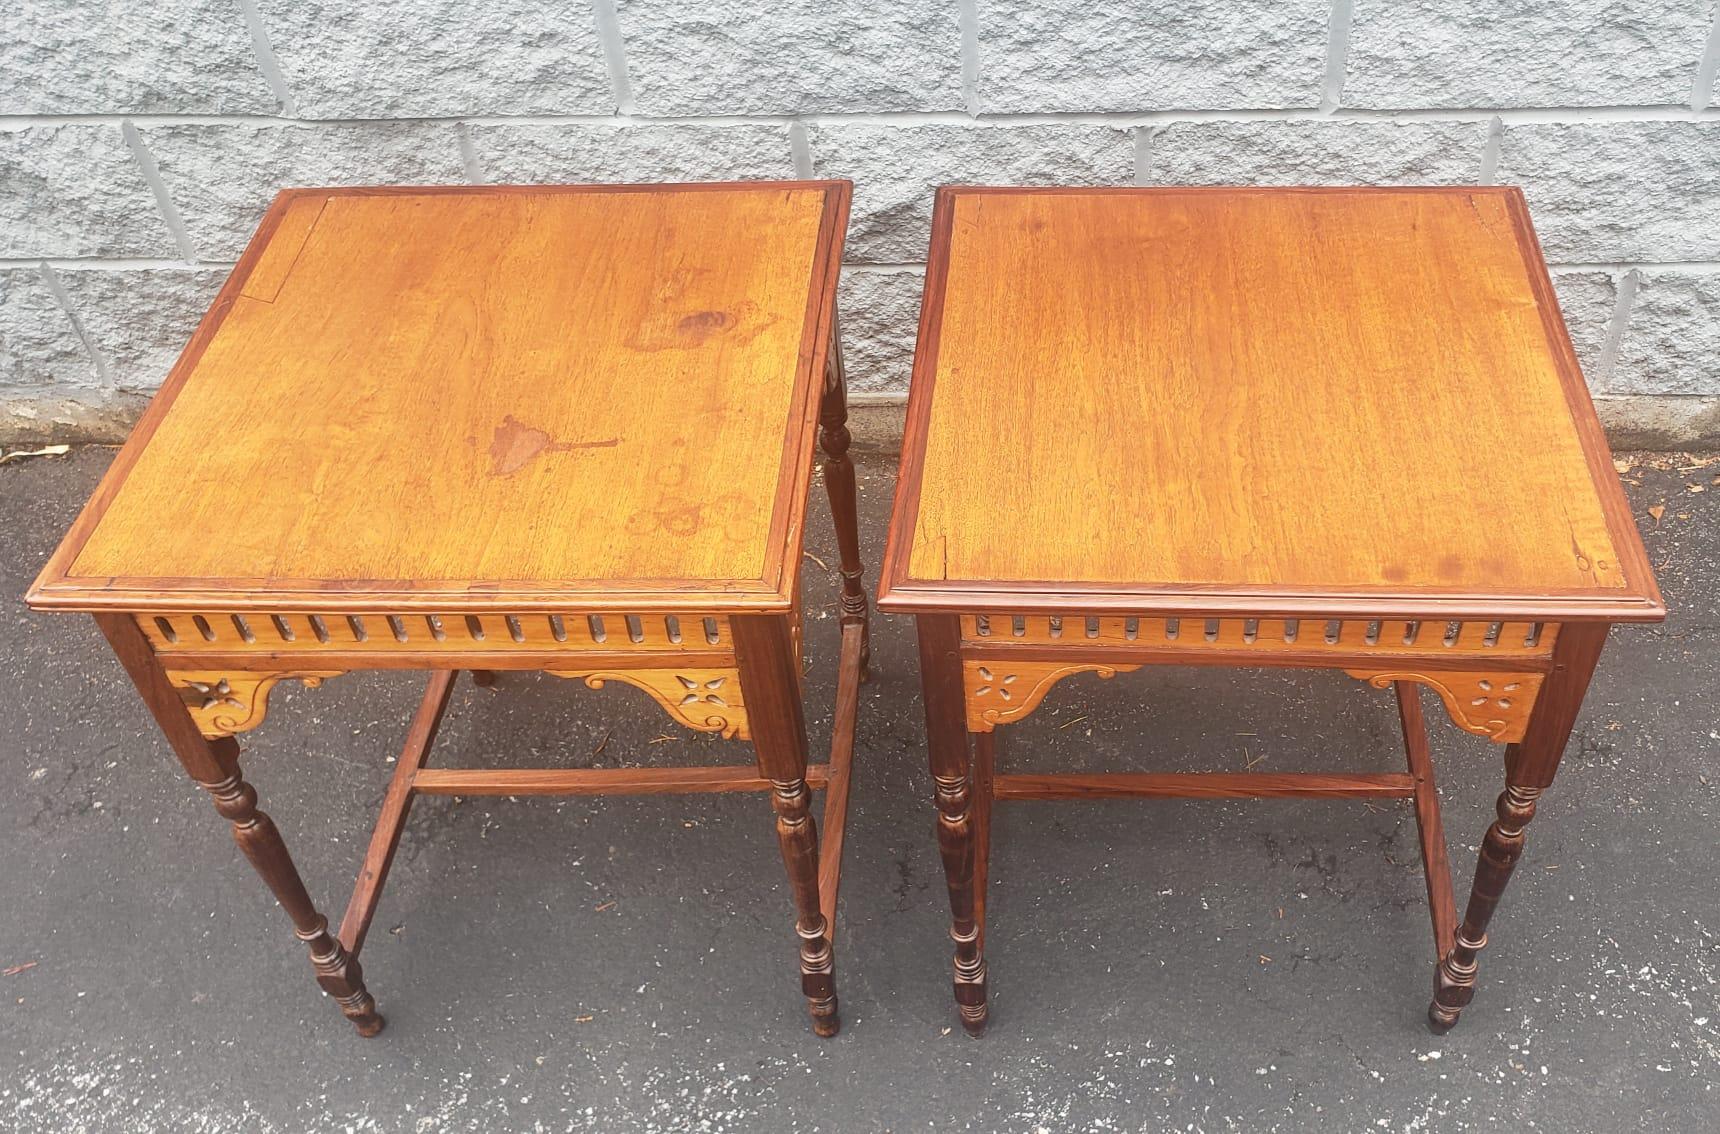 An exquisite pair of Anglo-Indian Victorian style walnut and rosewood square side tables. Measure 21.25